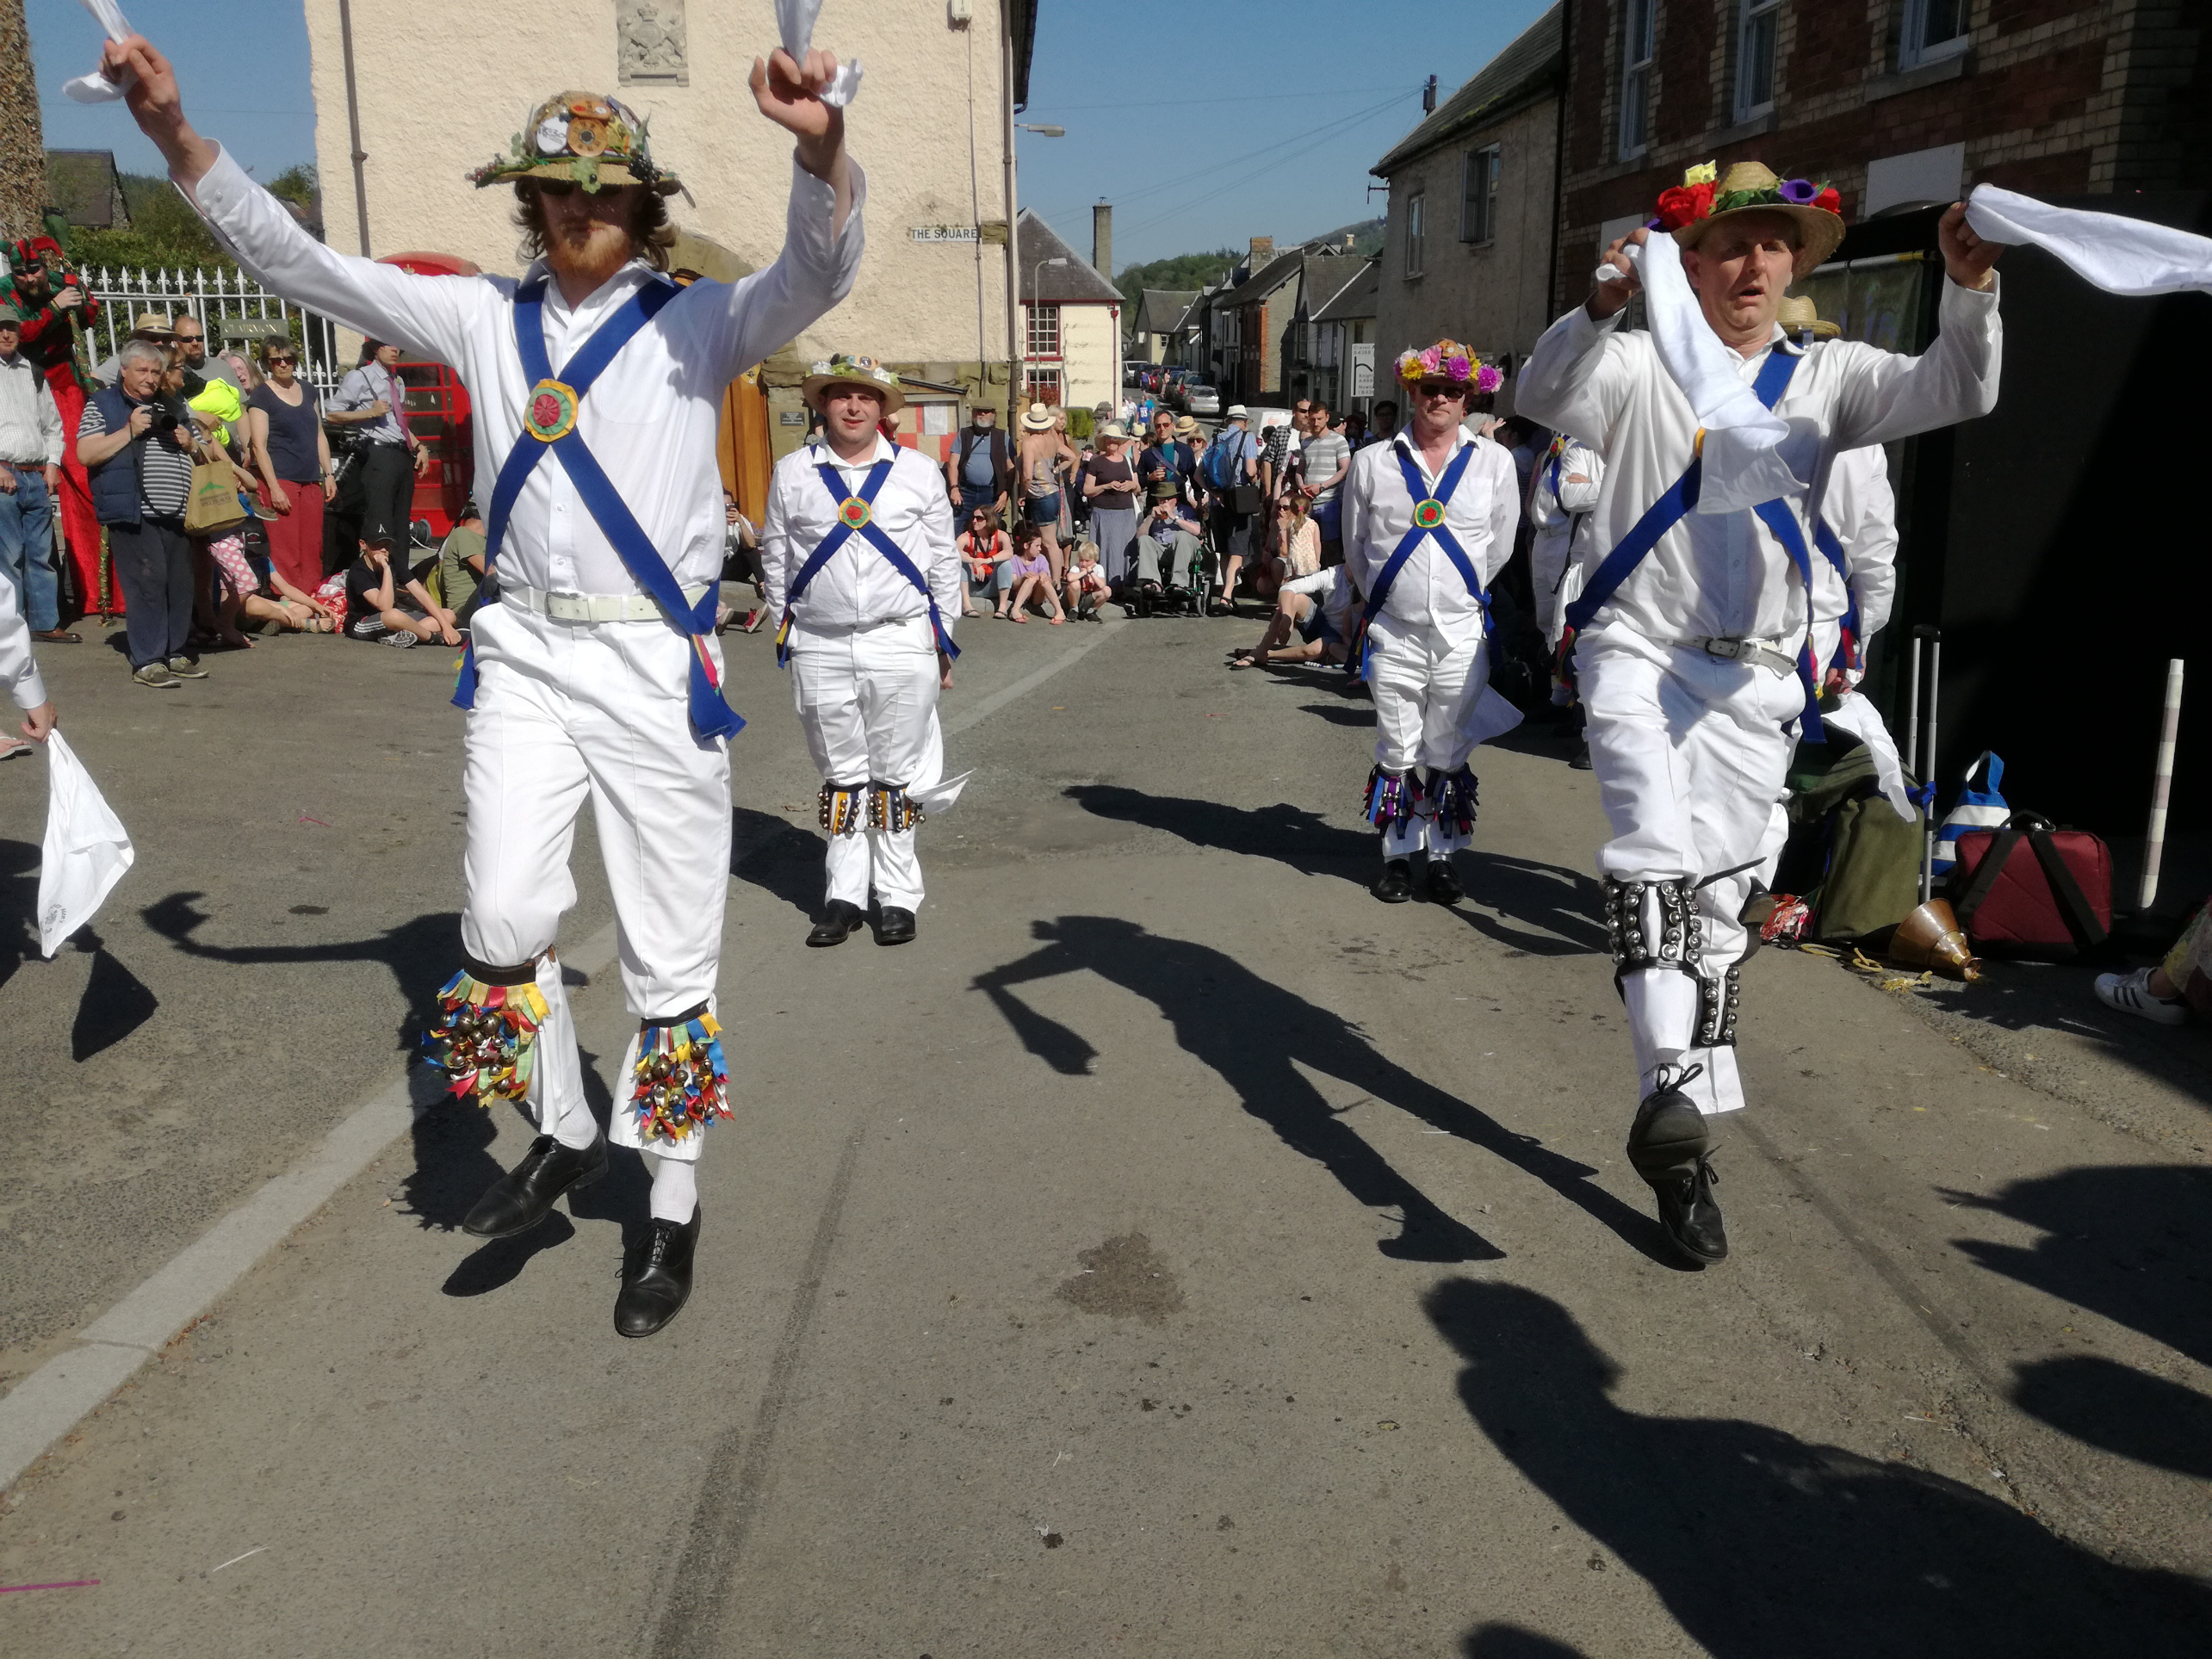 Dancing in Clun at The Green Man Festival